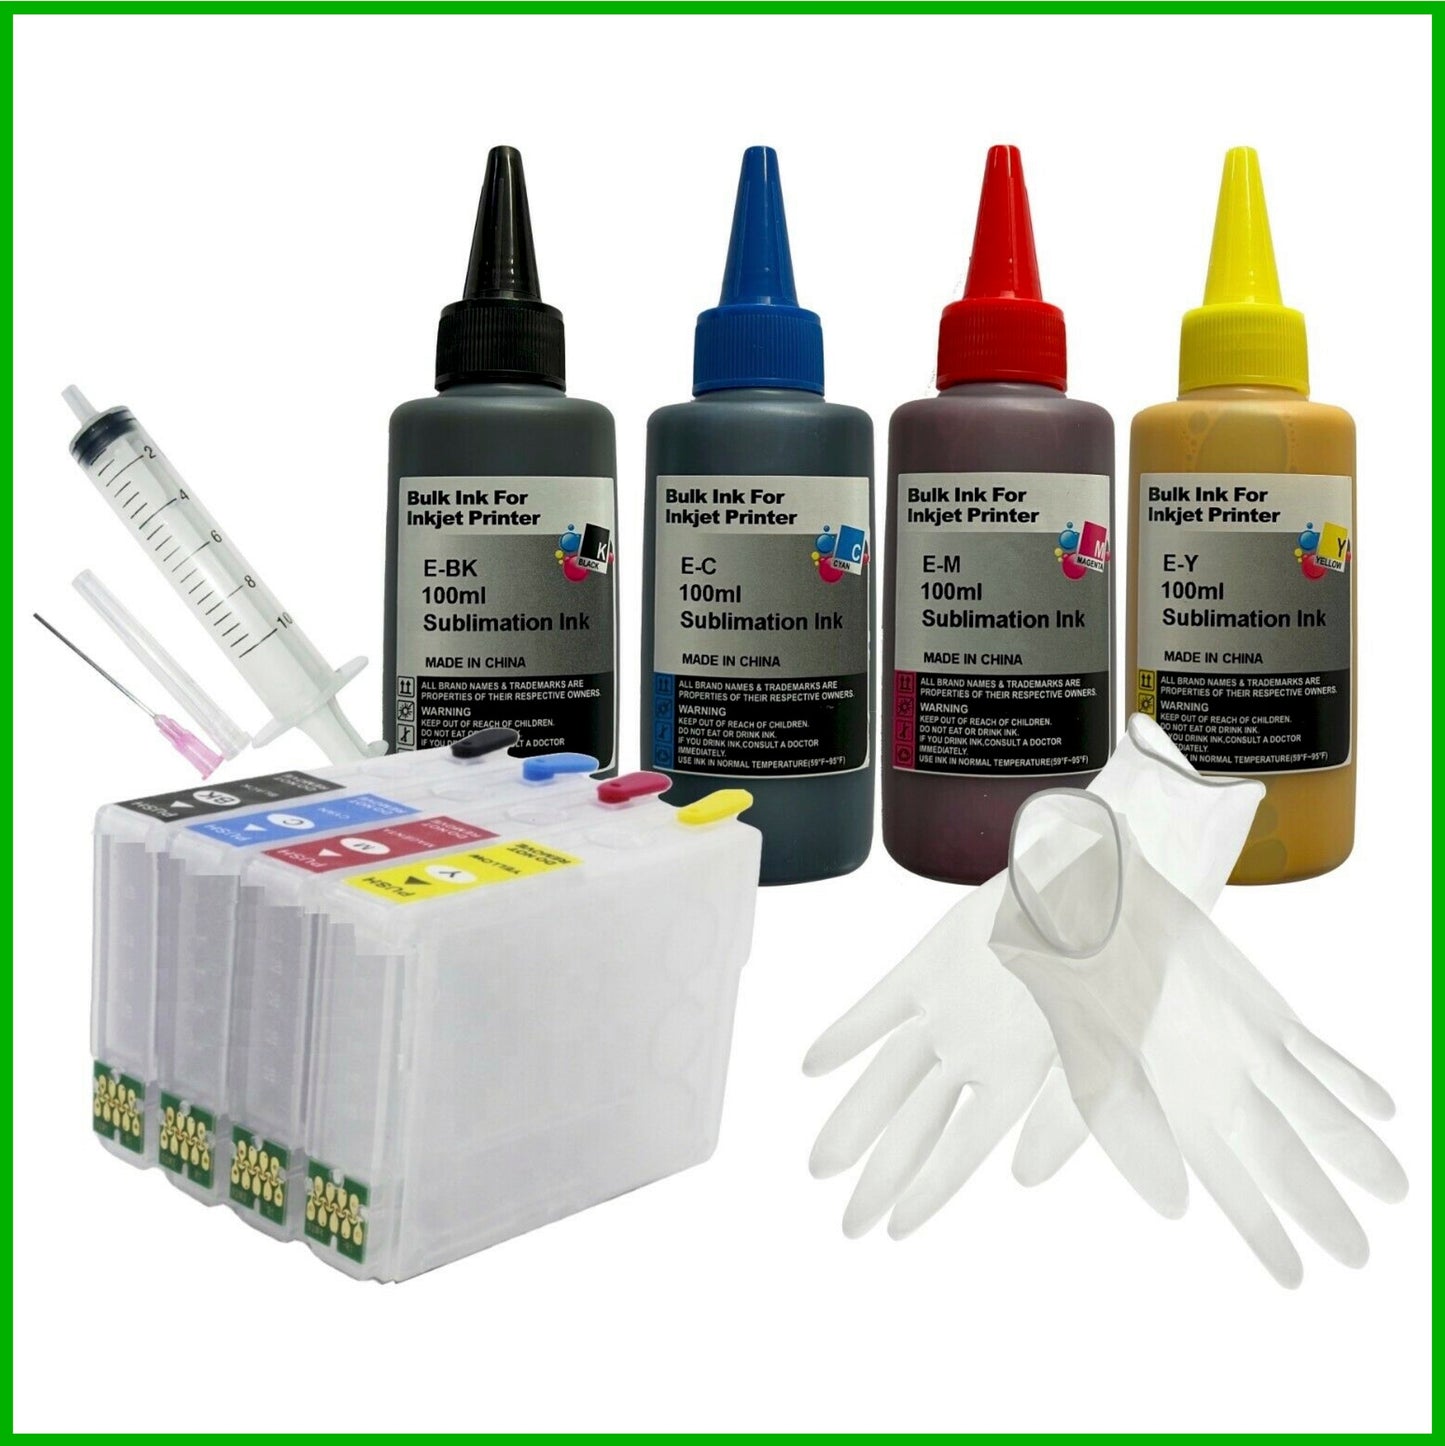 Sublimation Starter Kit - 715 Cartridges with ARC Chip & Ink for Epson Stylus